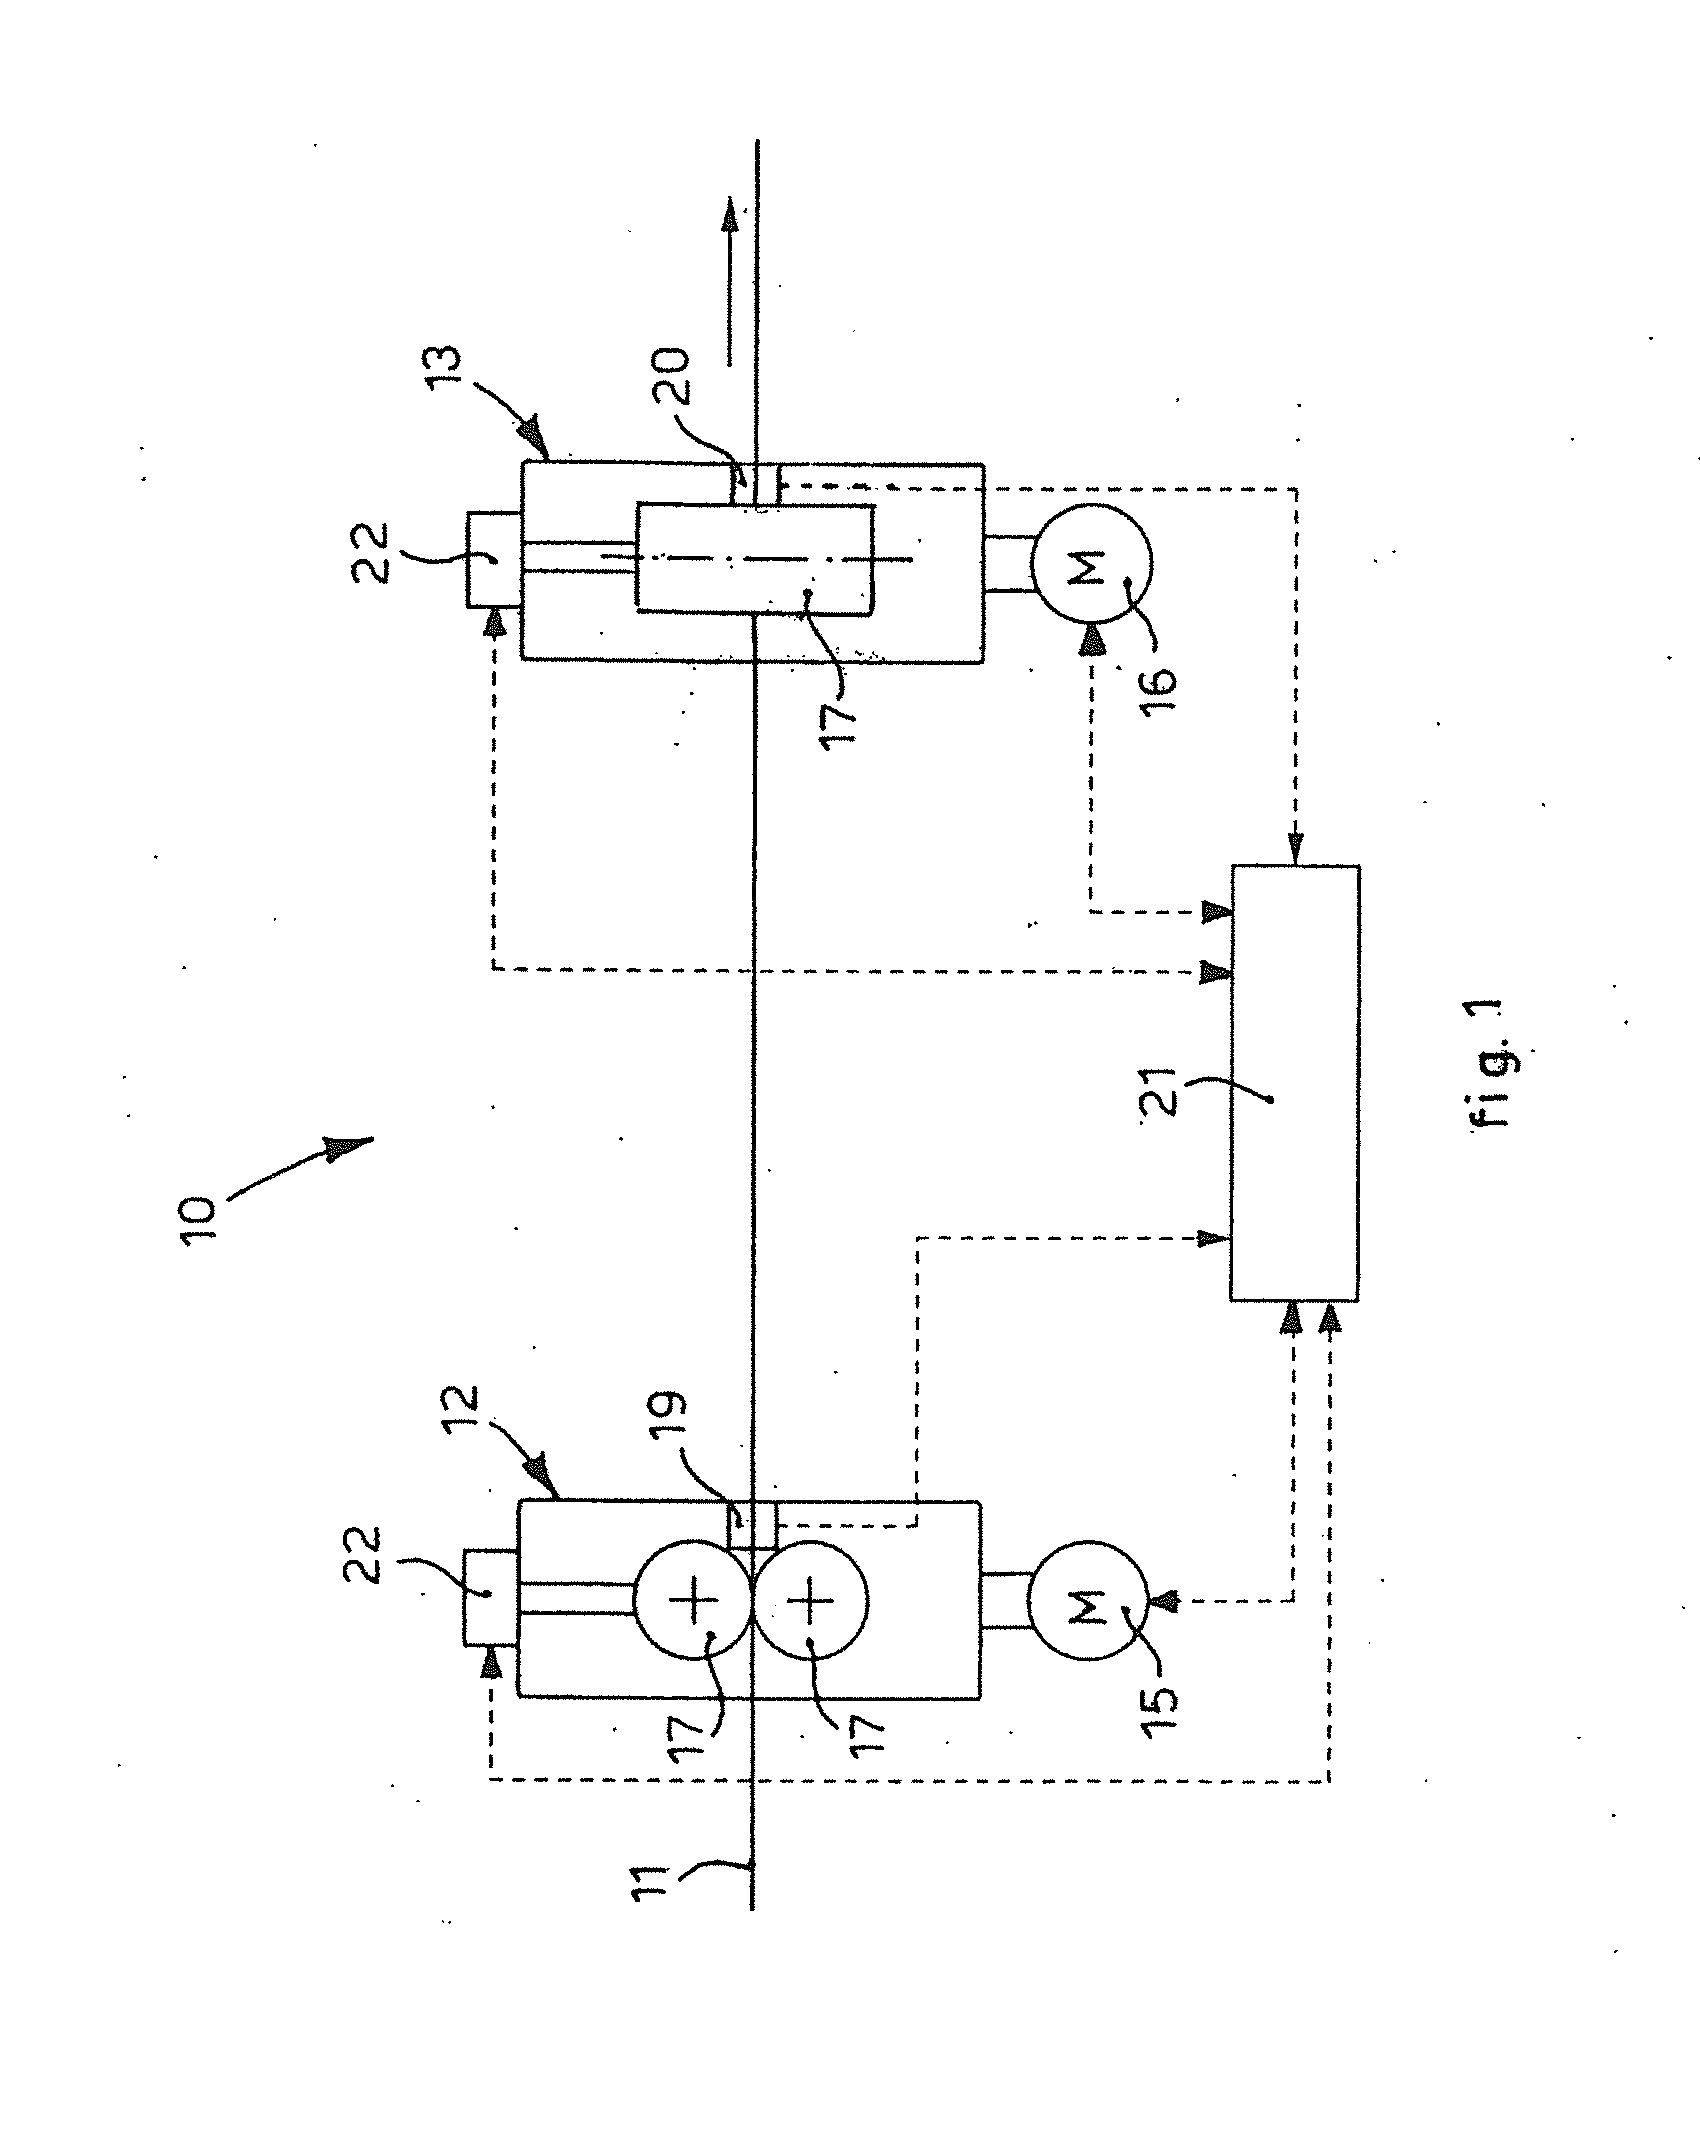 Method and device to control the section sizes of a rolled product